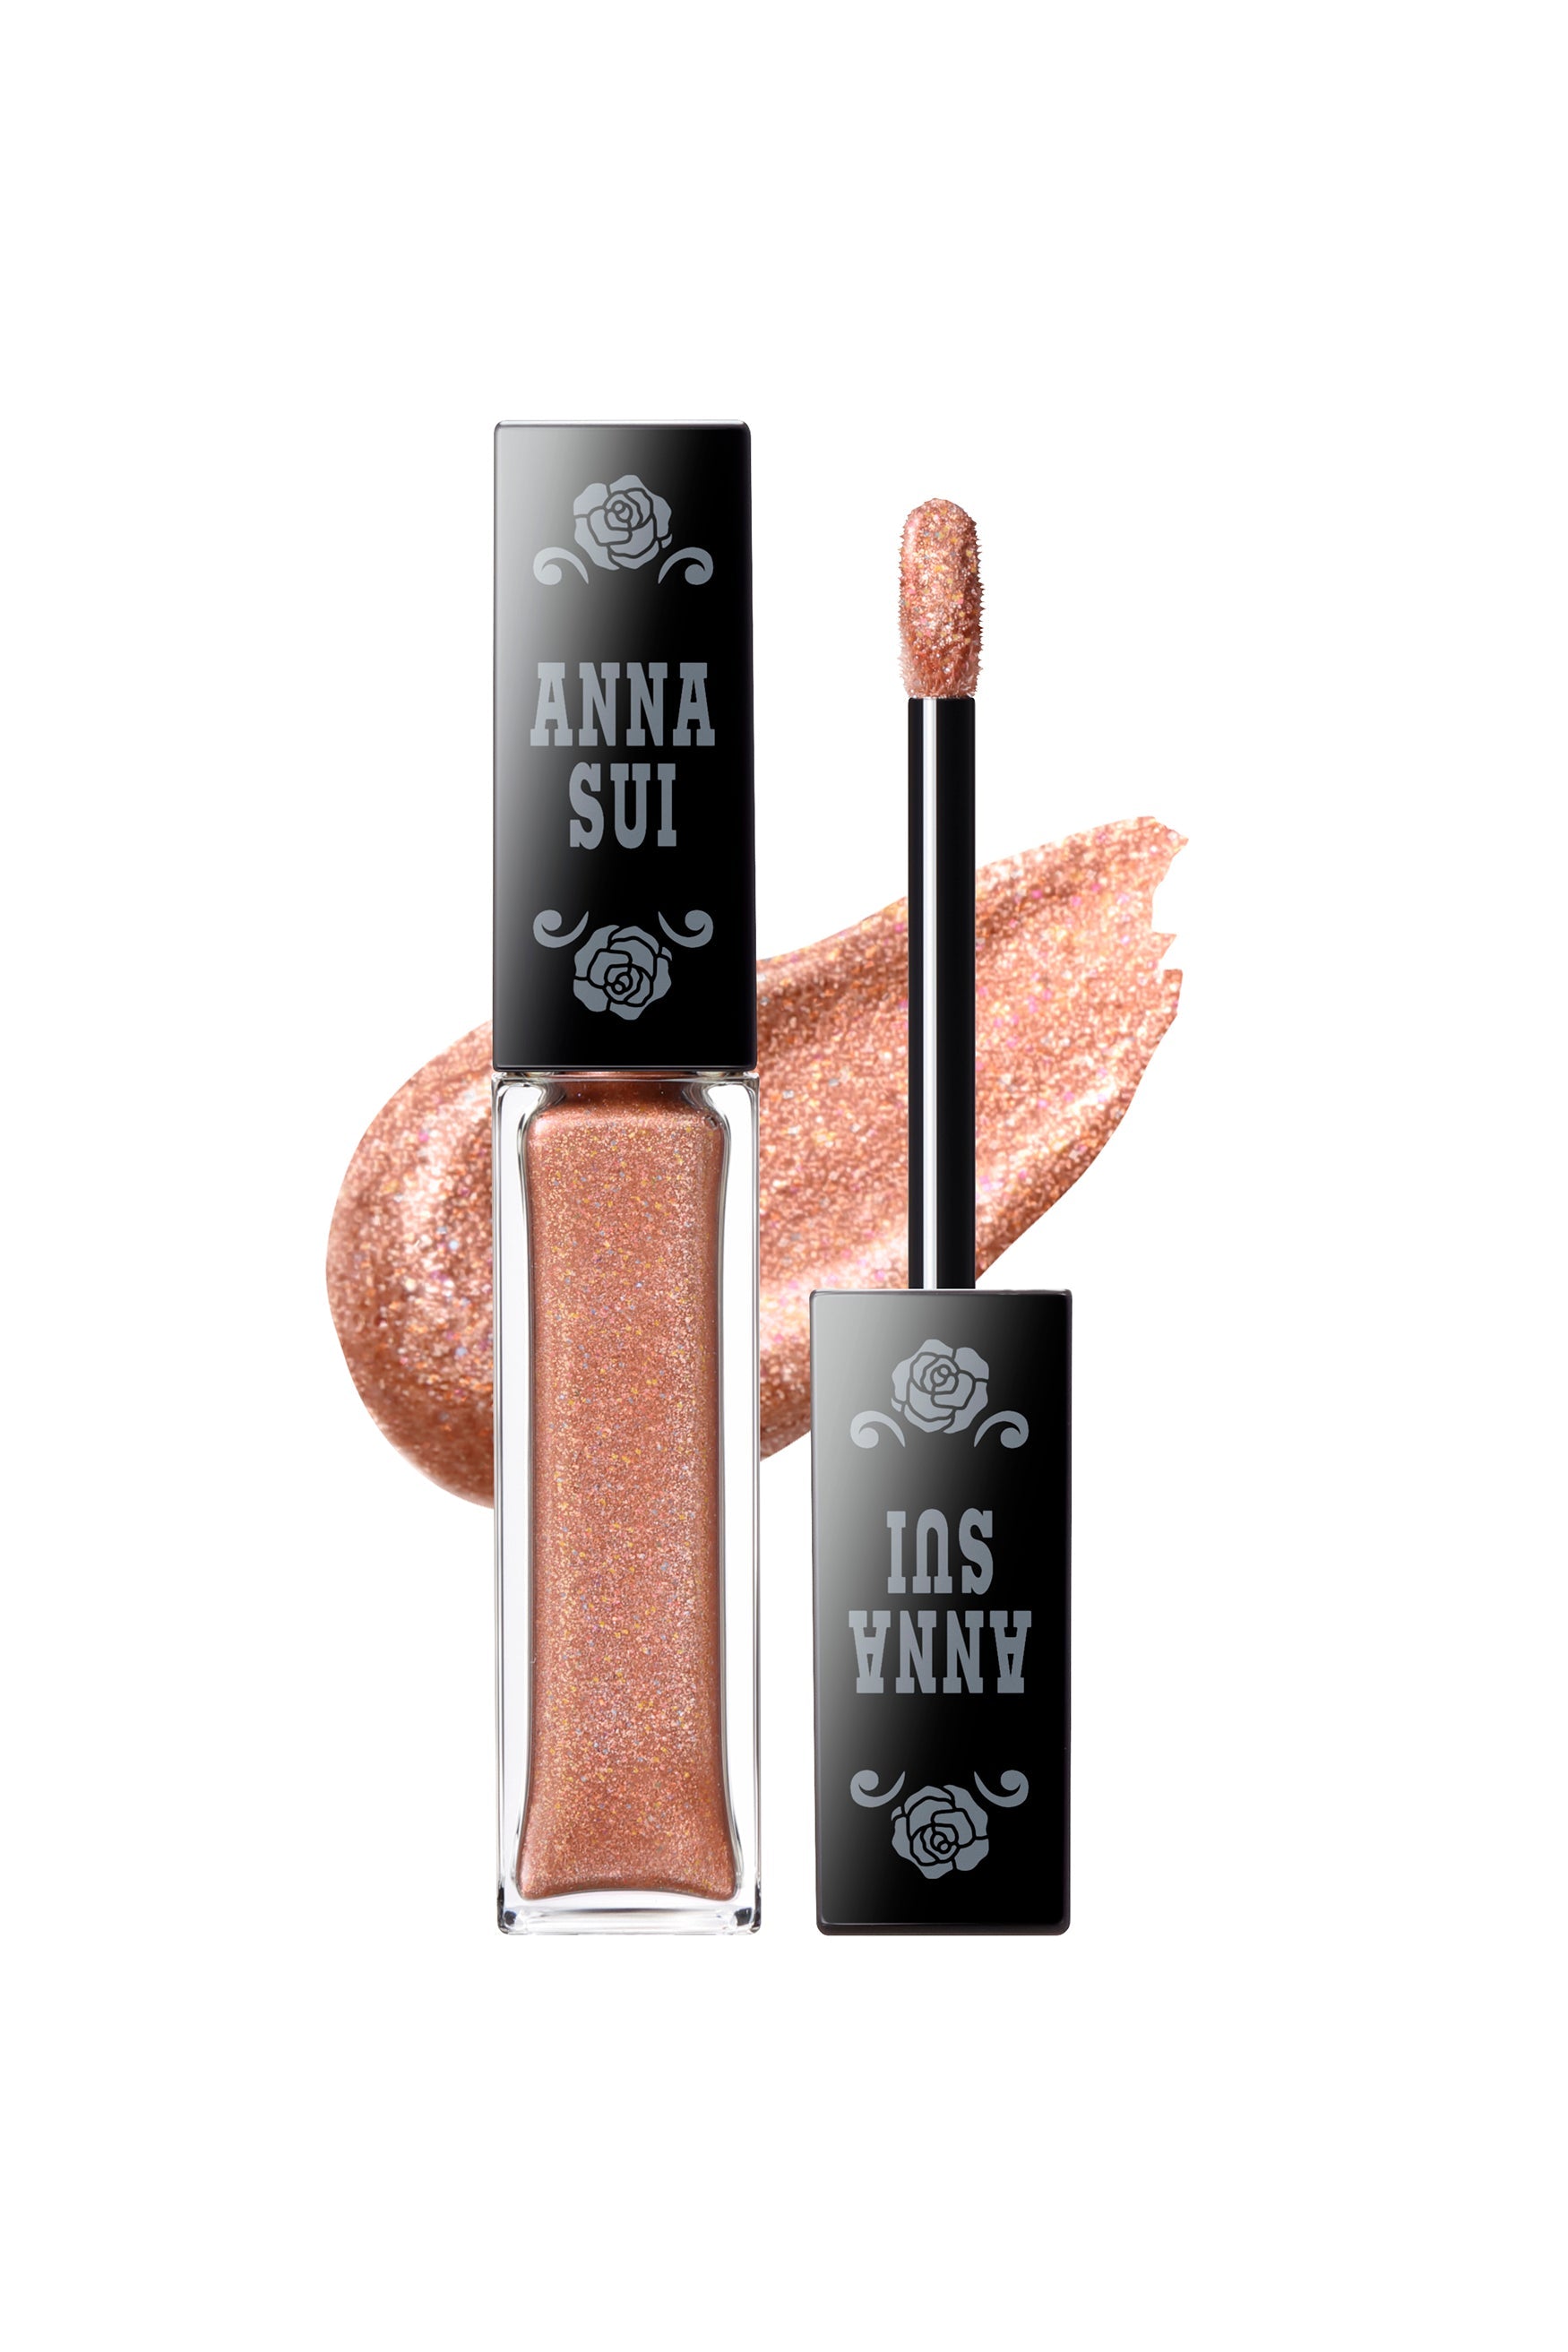 HONEY GLOW, Eye Glitter in a transparent bottle with Anna Sui label on the black top